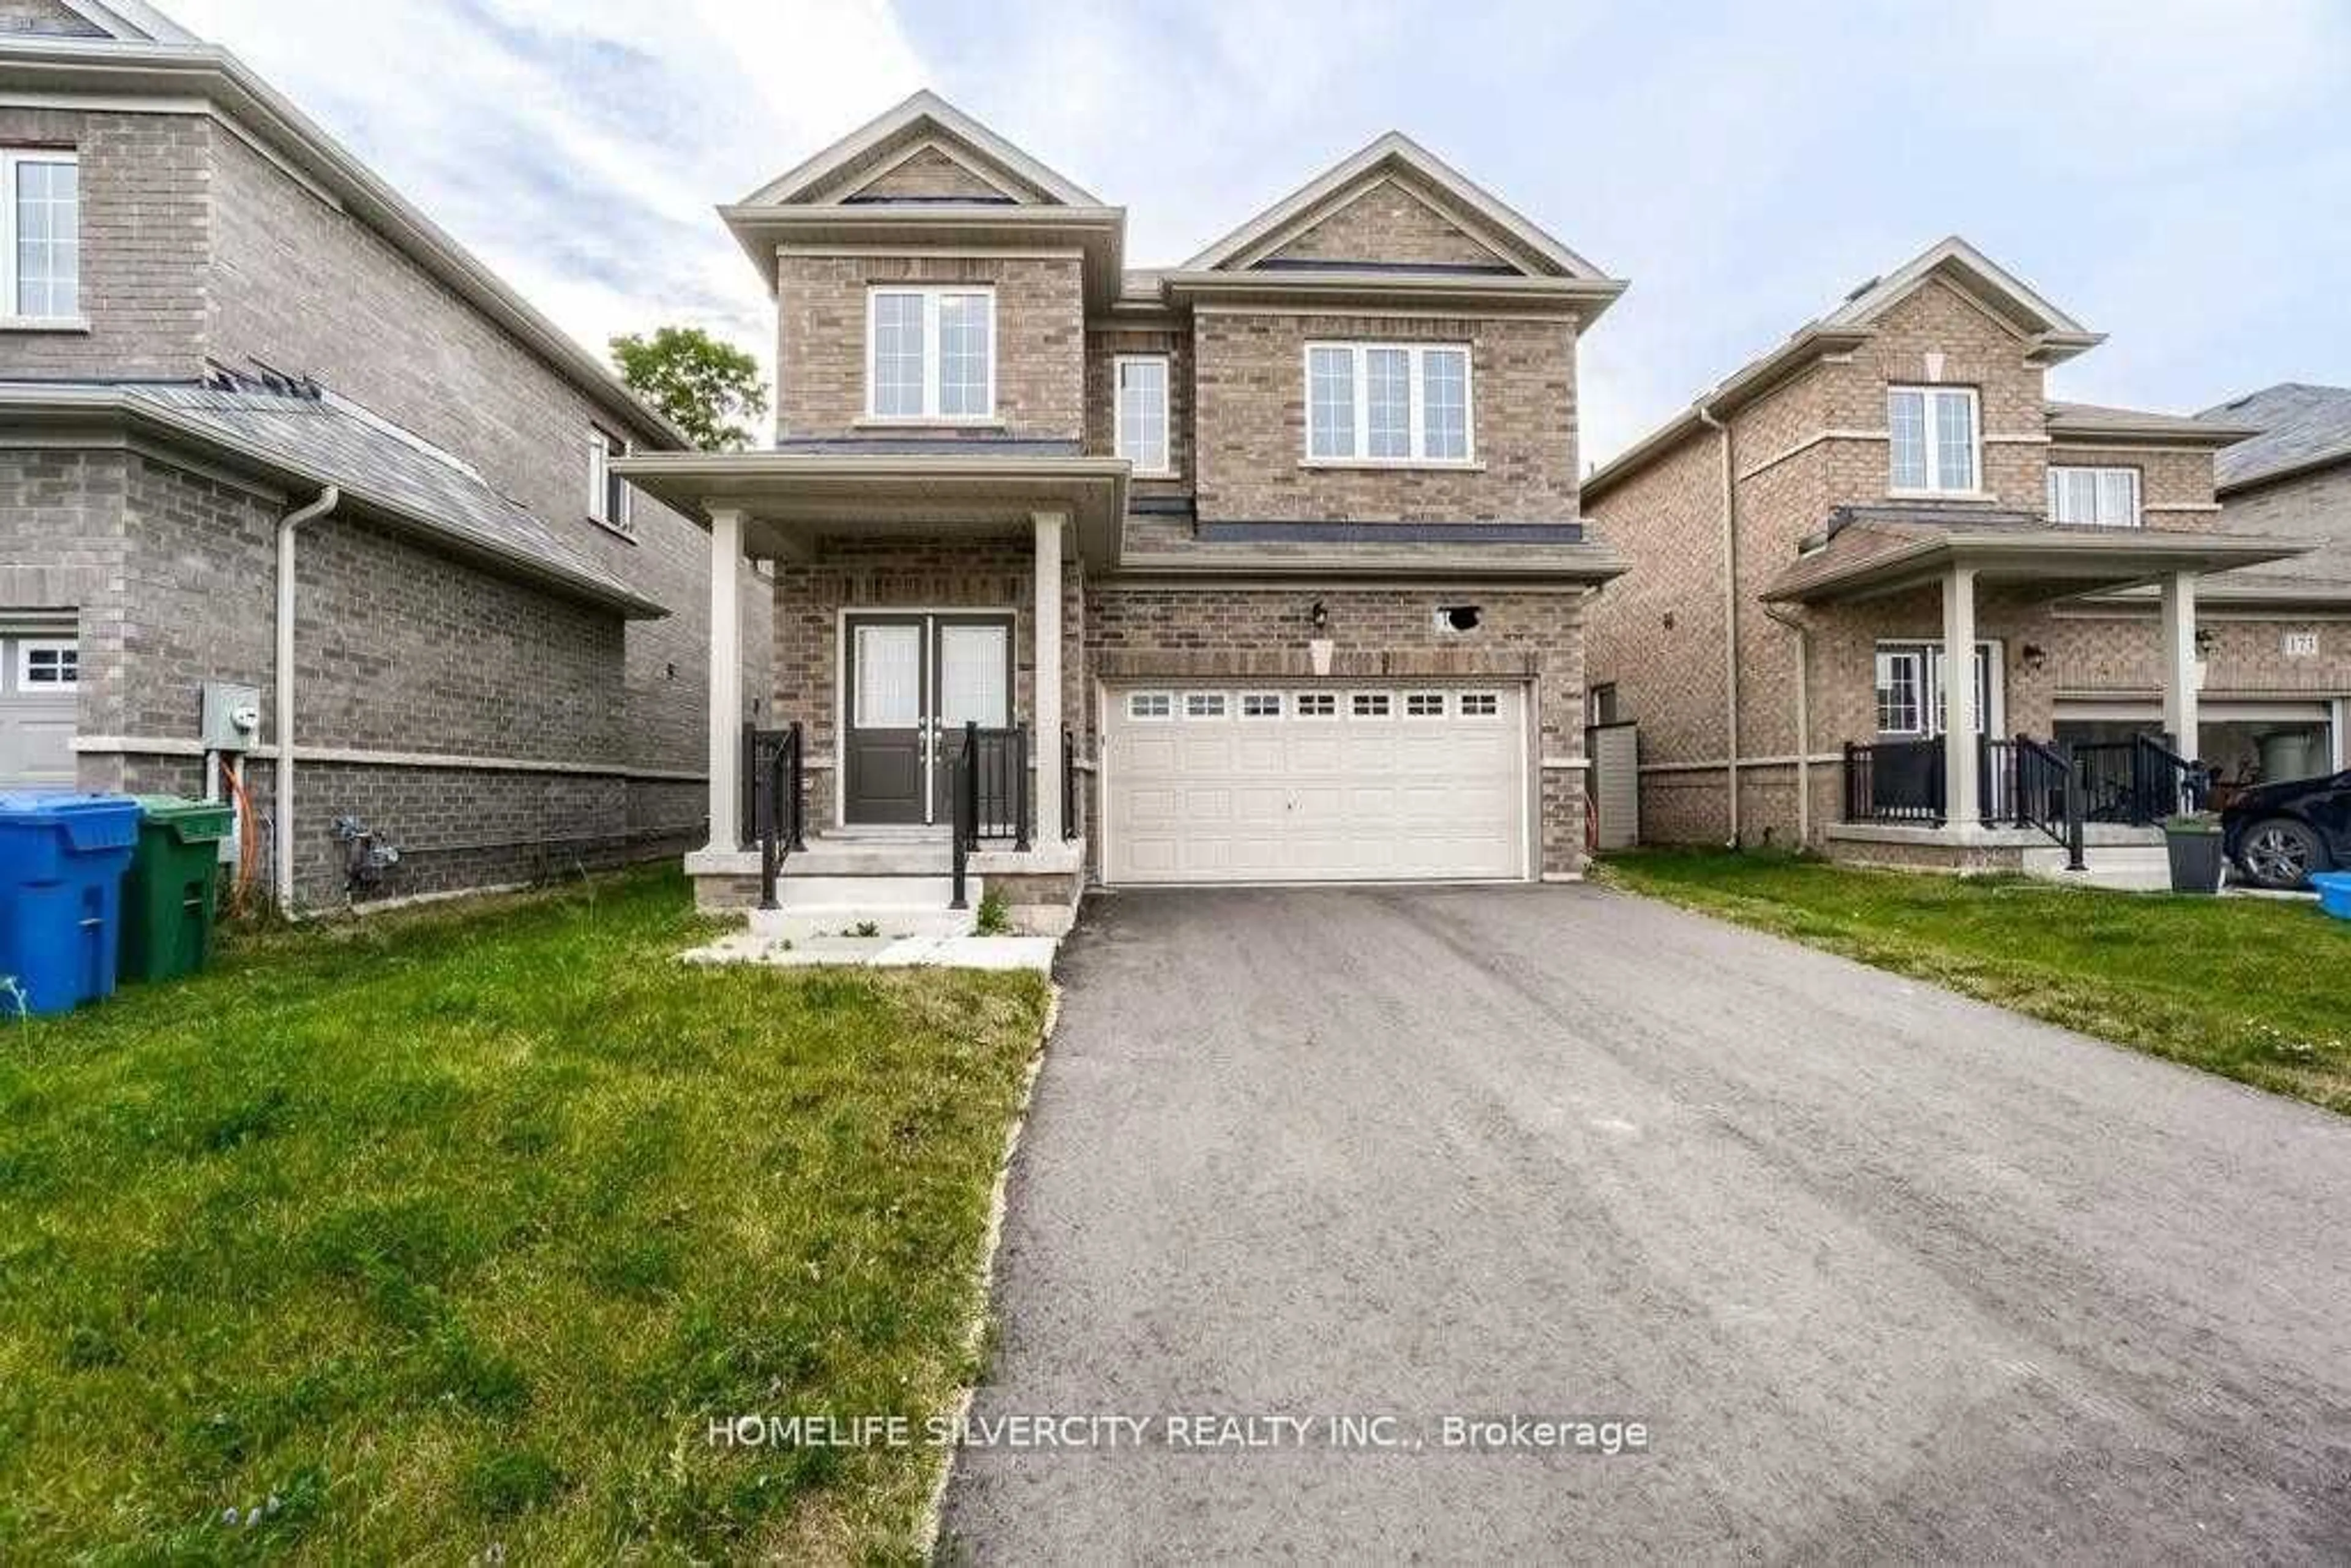 Frontside or backside of a home for 185 Werry Ave, Southgate Ontario N0C 1B0